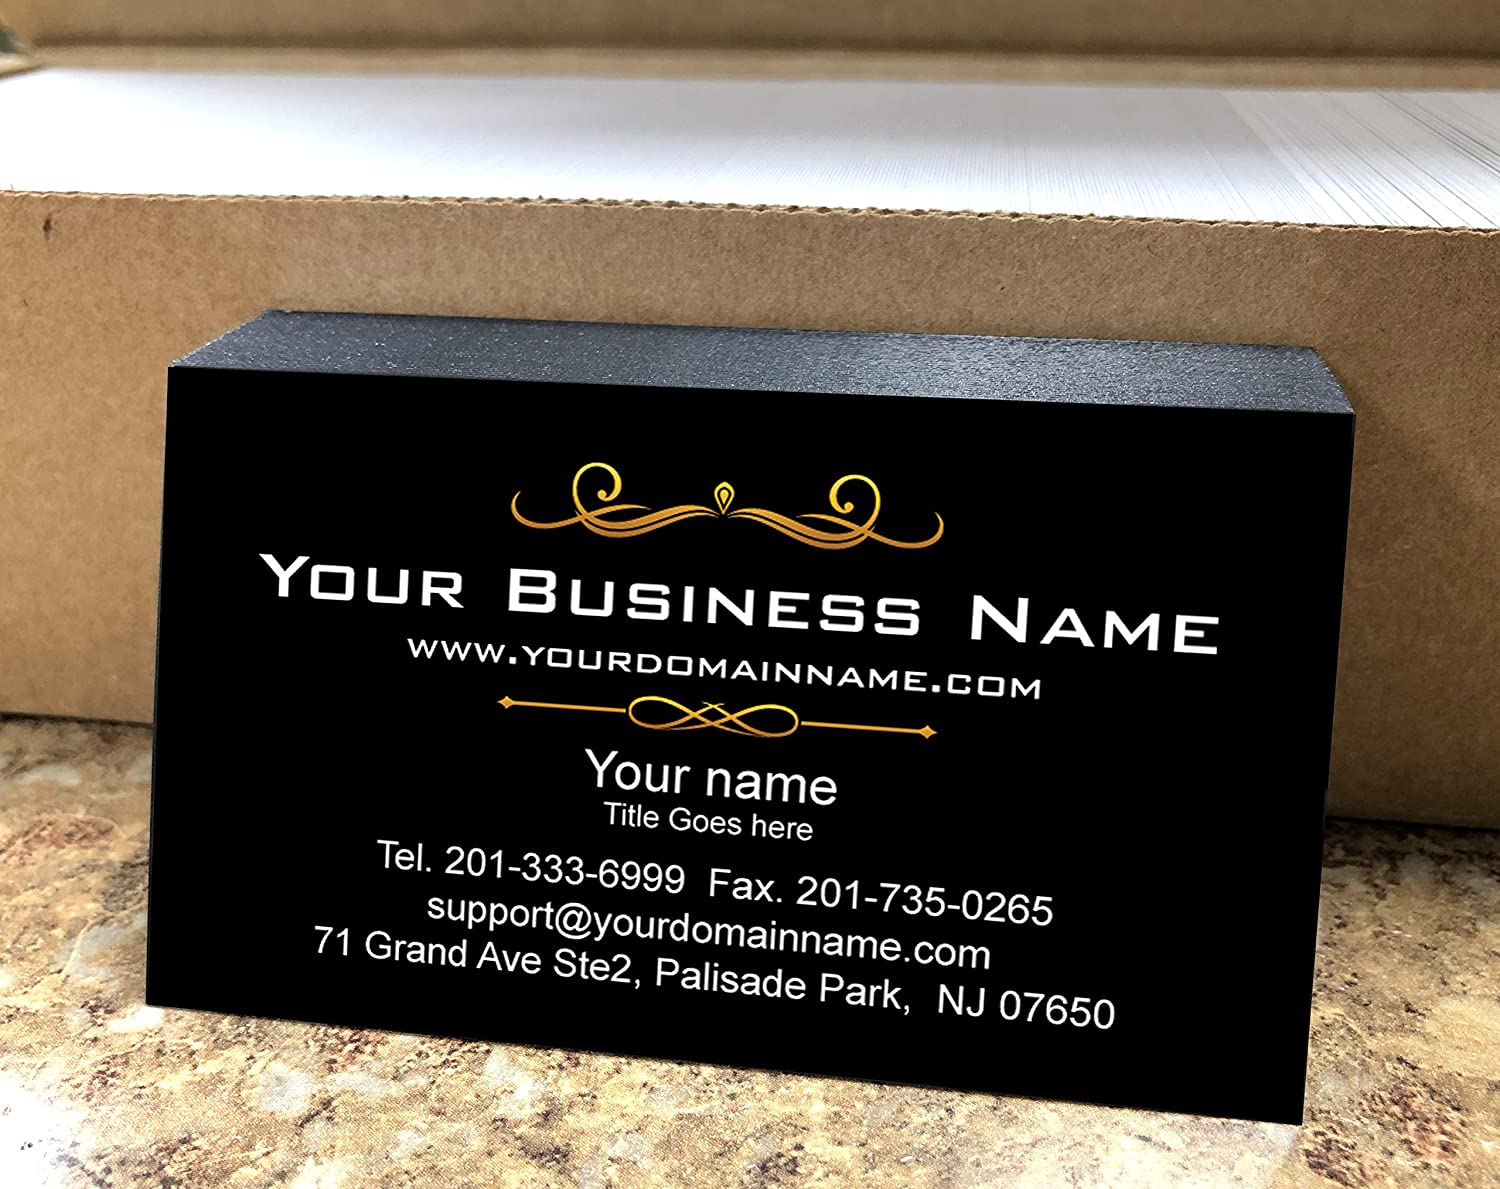 How to use business card for marketing